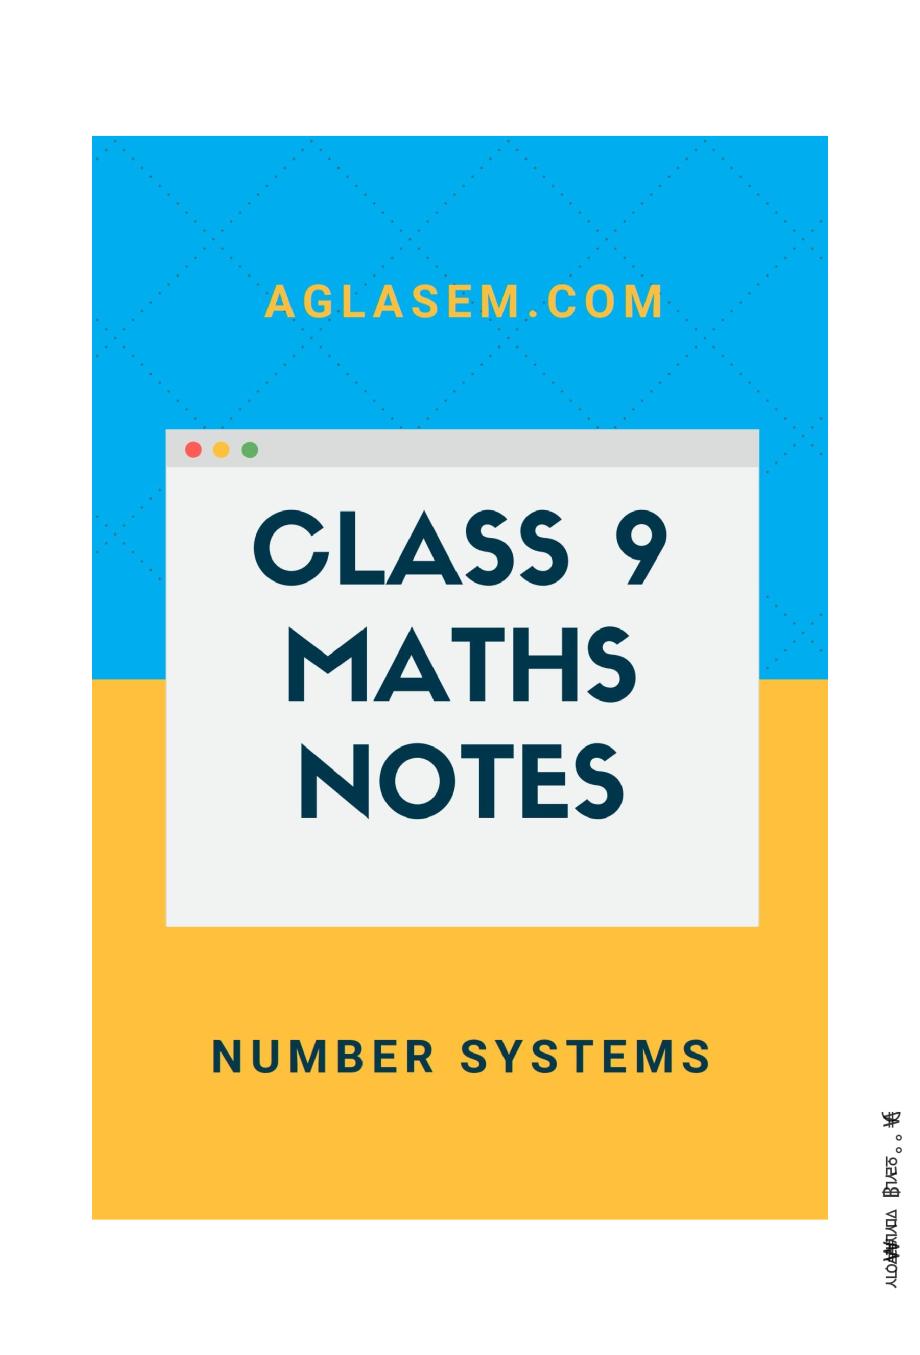 Class 9 Maths Notes for Number Systems - Page 1